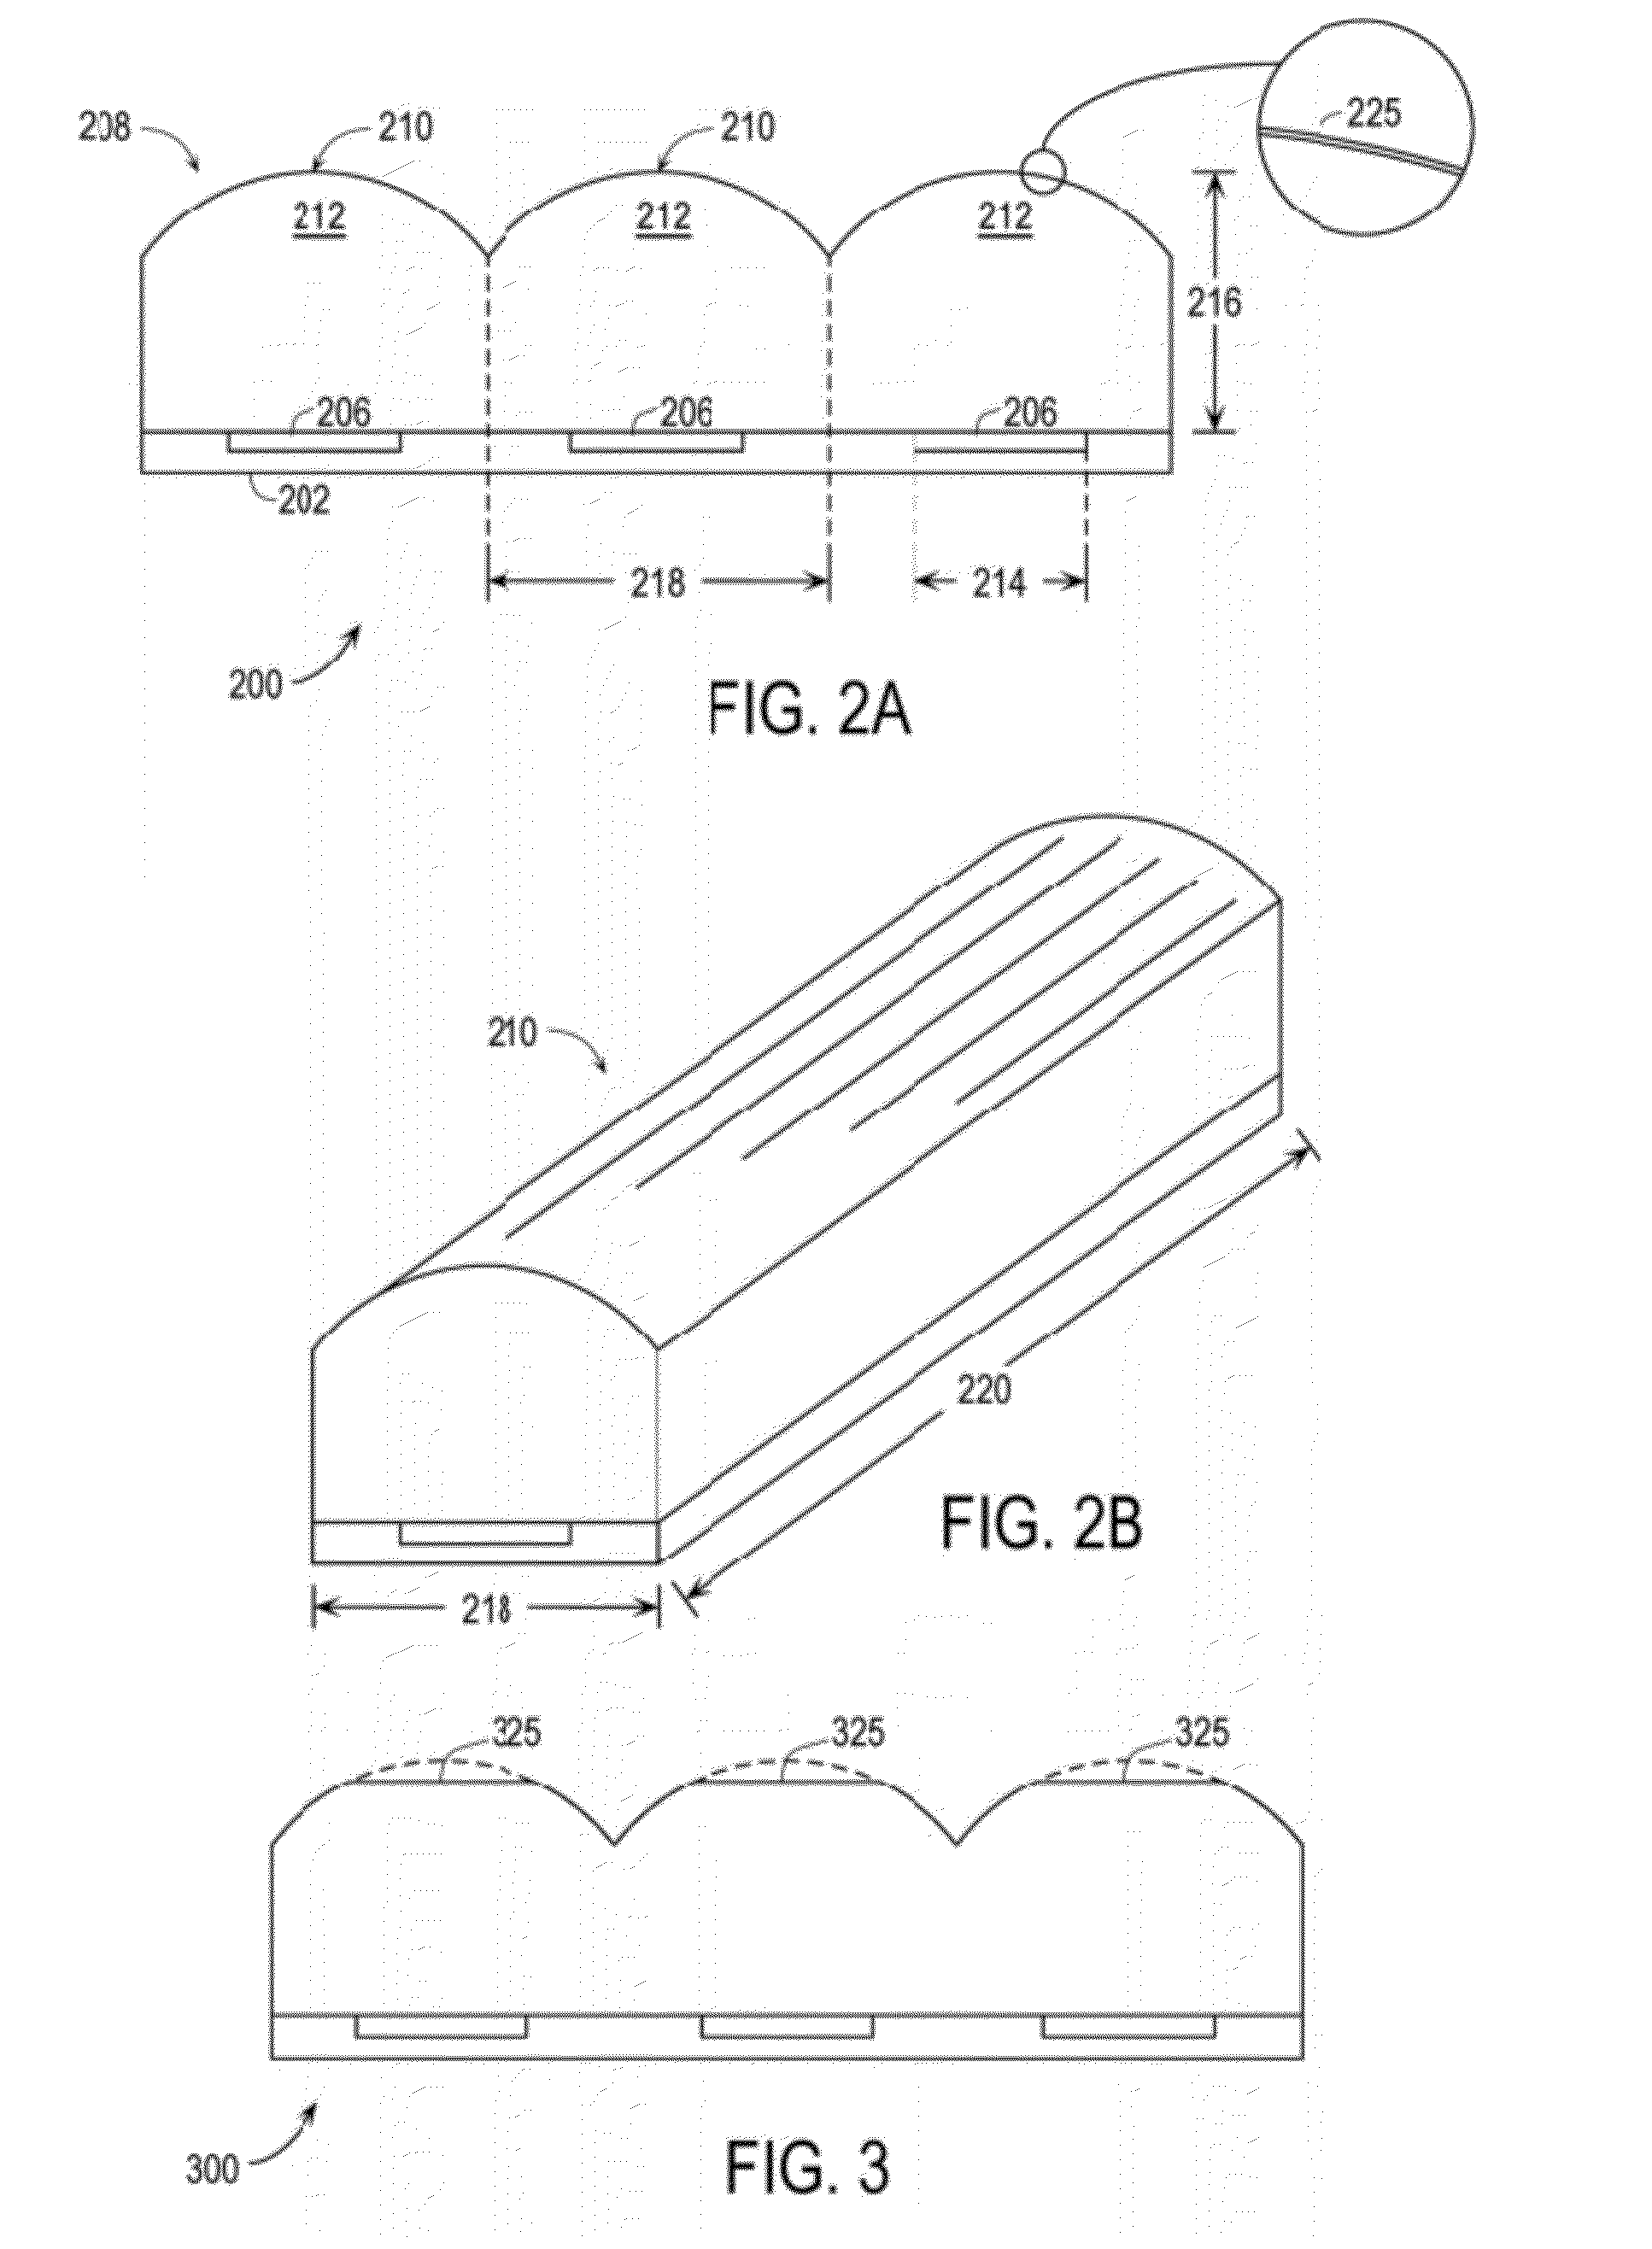 High impact and load bearing solar glass for a concentrated large area solar module and method